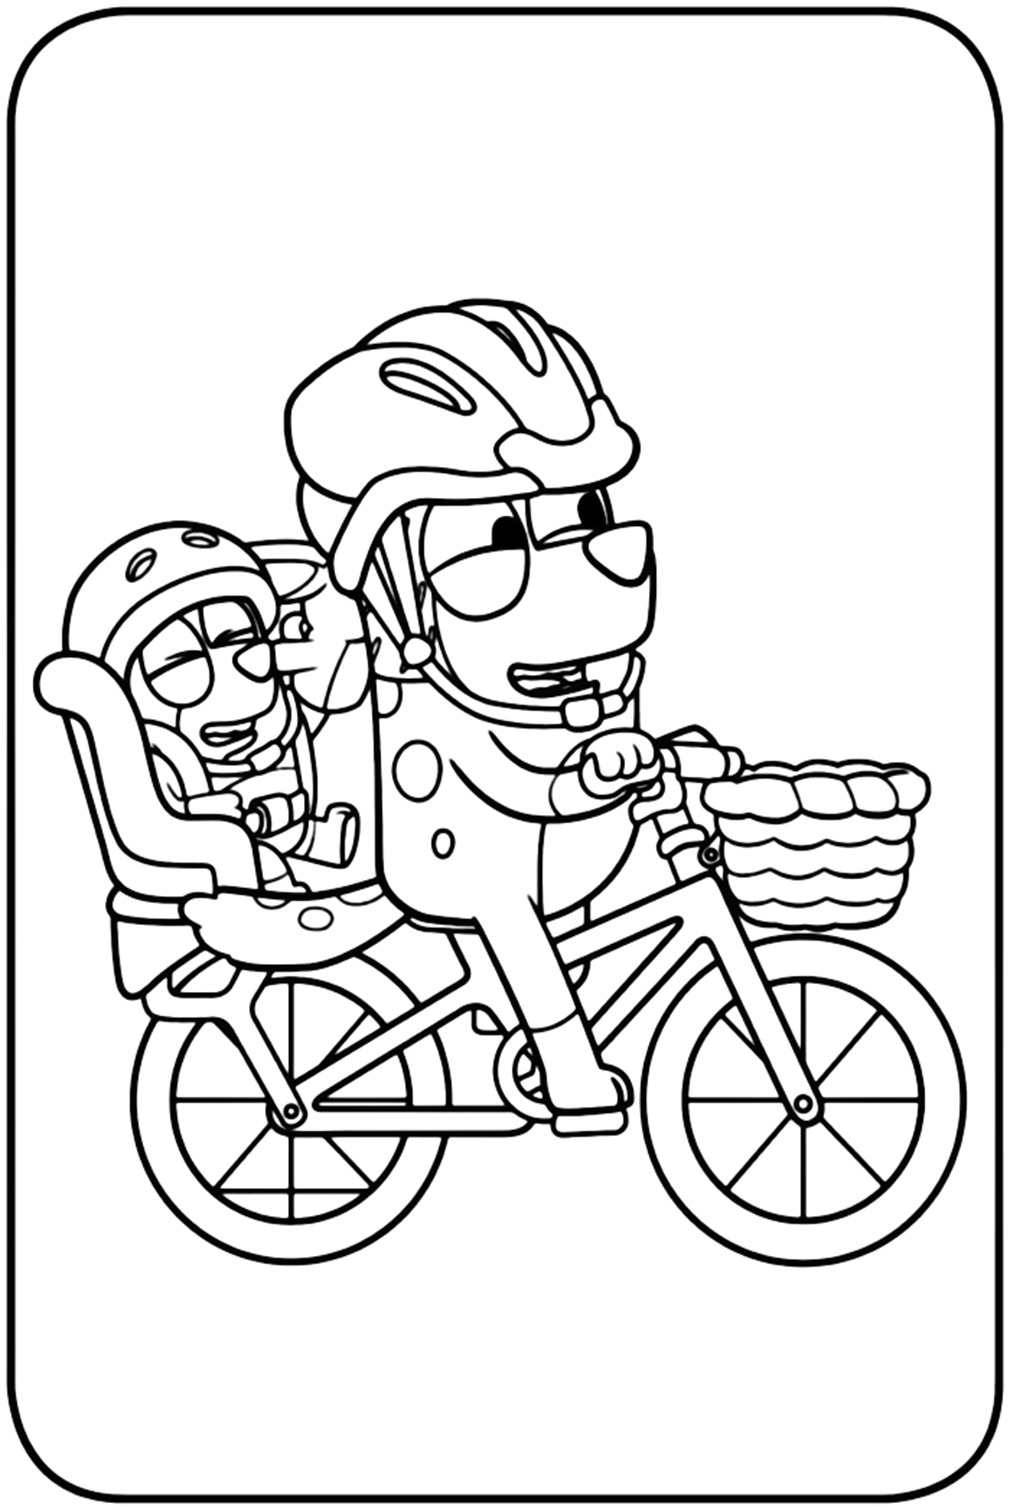 Bluey On A Bike Coloring Pages